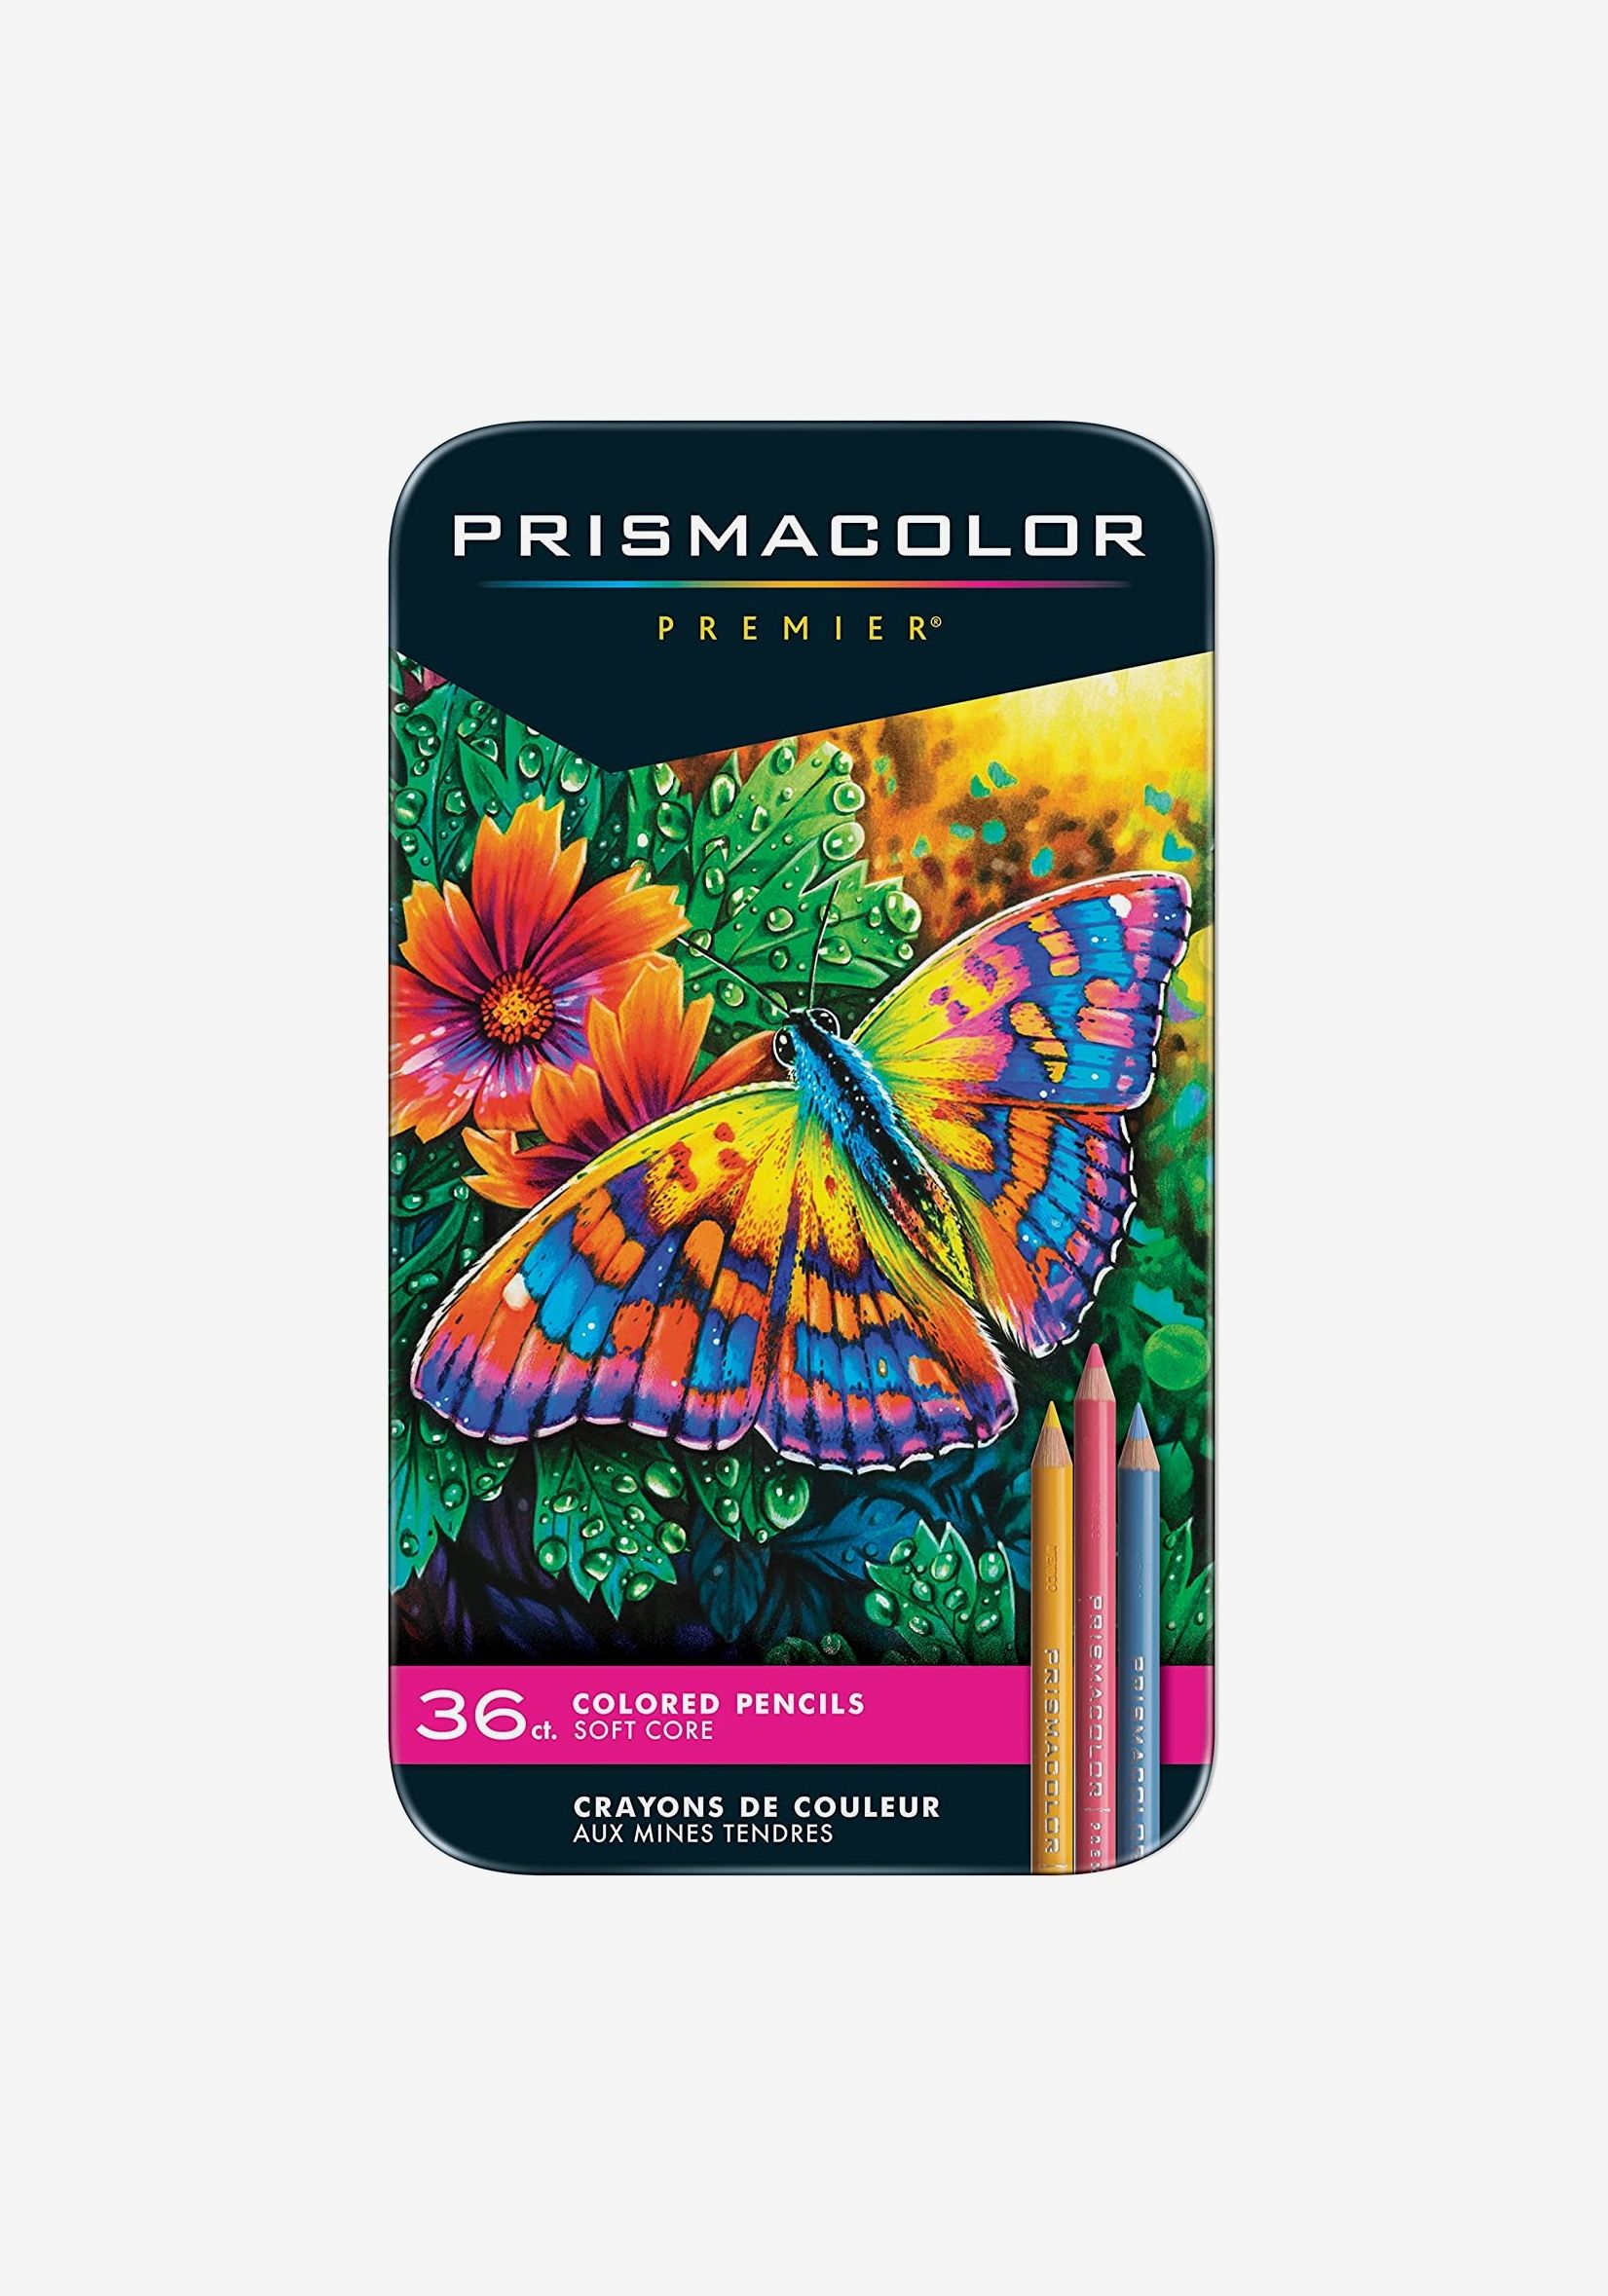 The Best Colored Pencils: Smooth, Waxy, Soft, Hard, Crisp, or Lush